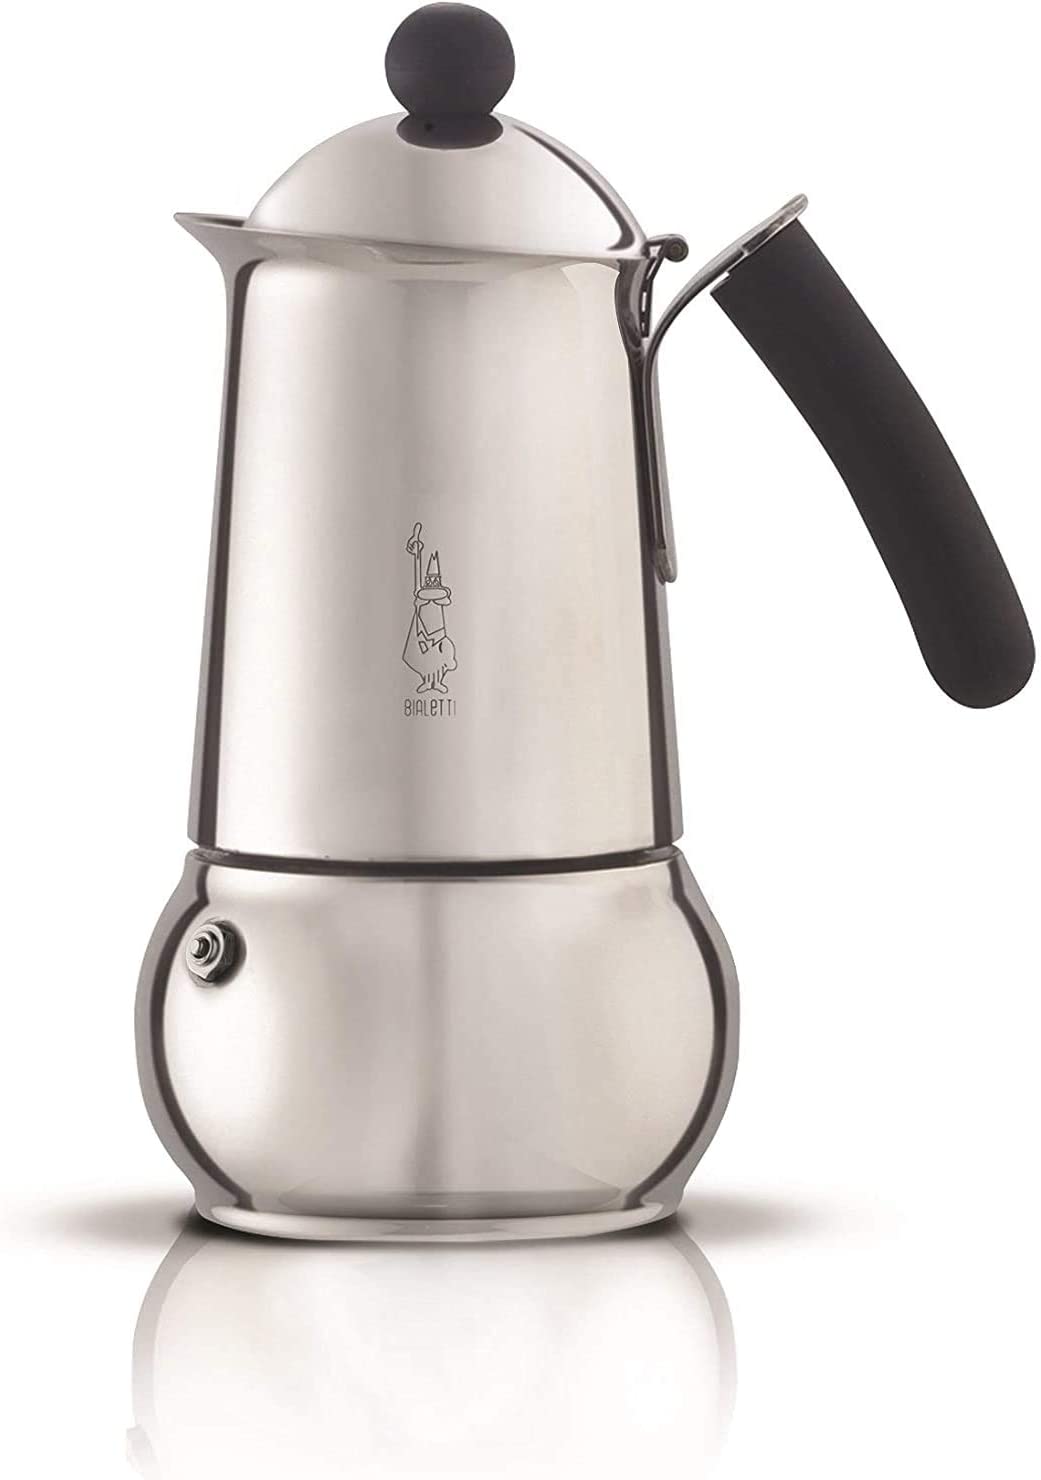 Bialetti Class Induction 4645 Espresso Maker for 10 Cups Stainless Steel Silver 30 x 20 x 15 cm